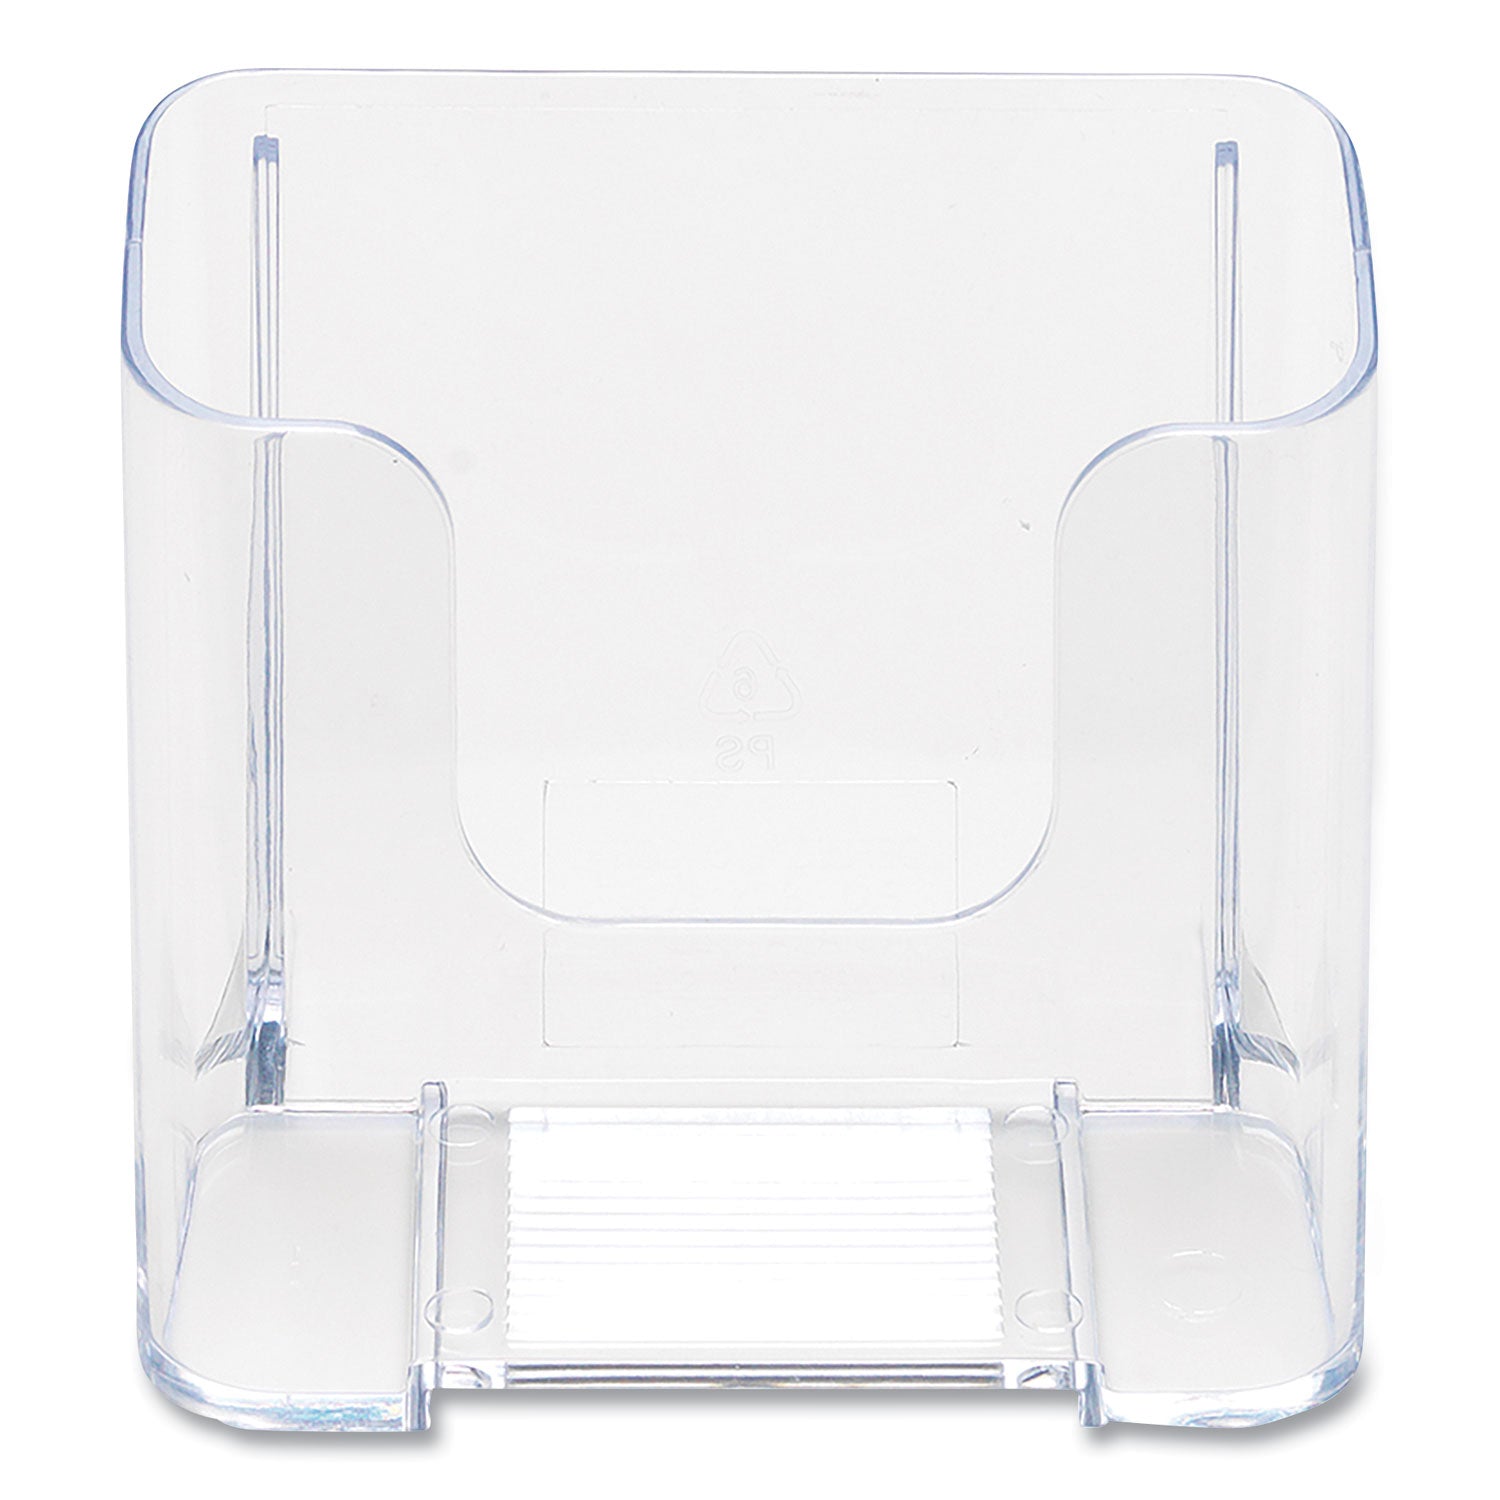 docuholder-for-countertop-wall-mount-leaflet-size-437w-x-325d-x-387h-clear_def75001 - 7